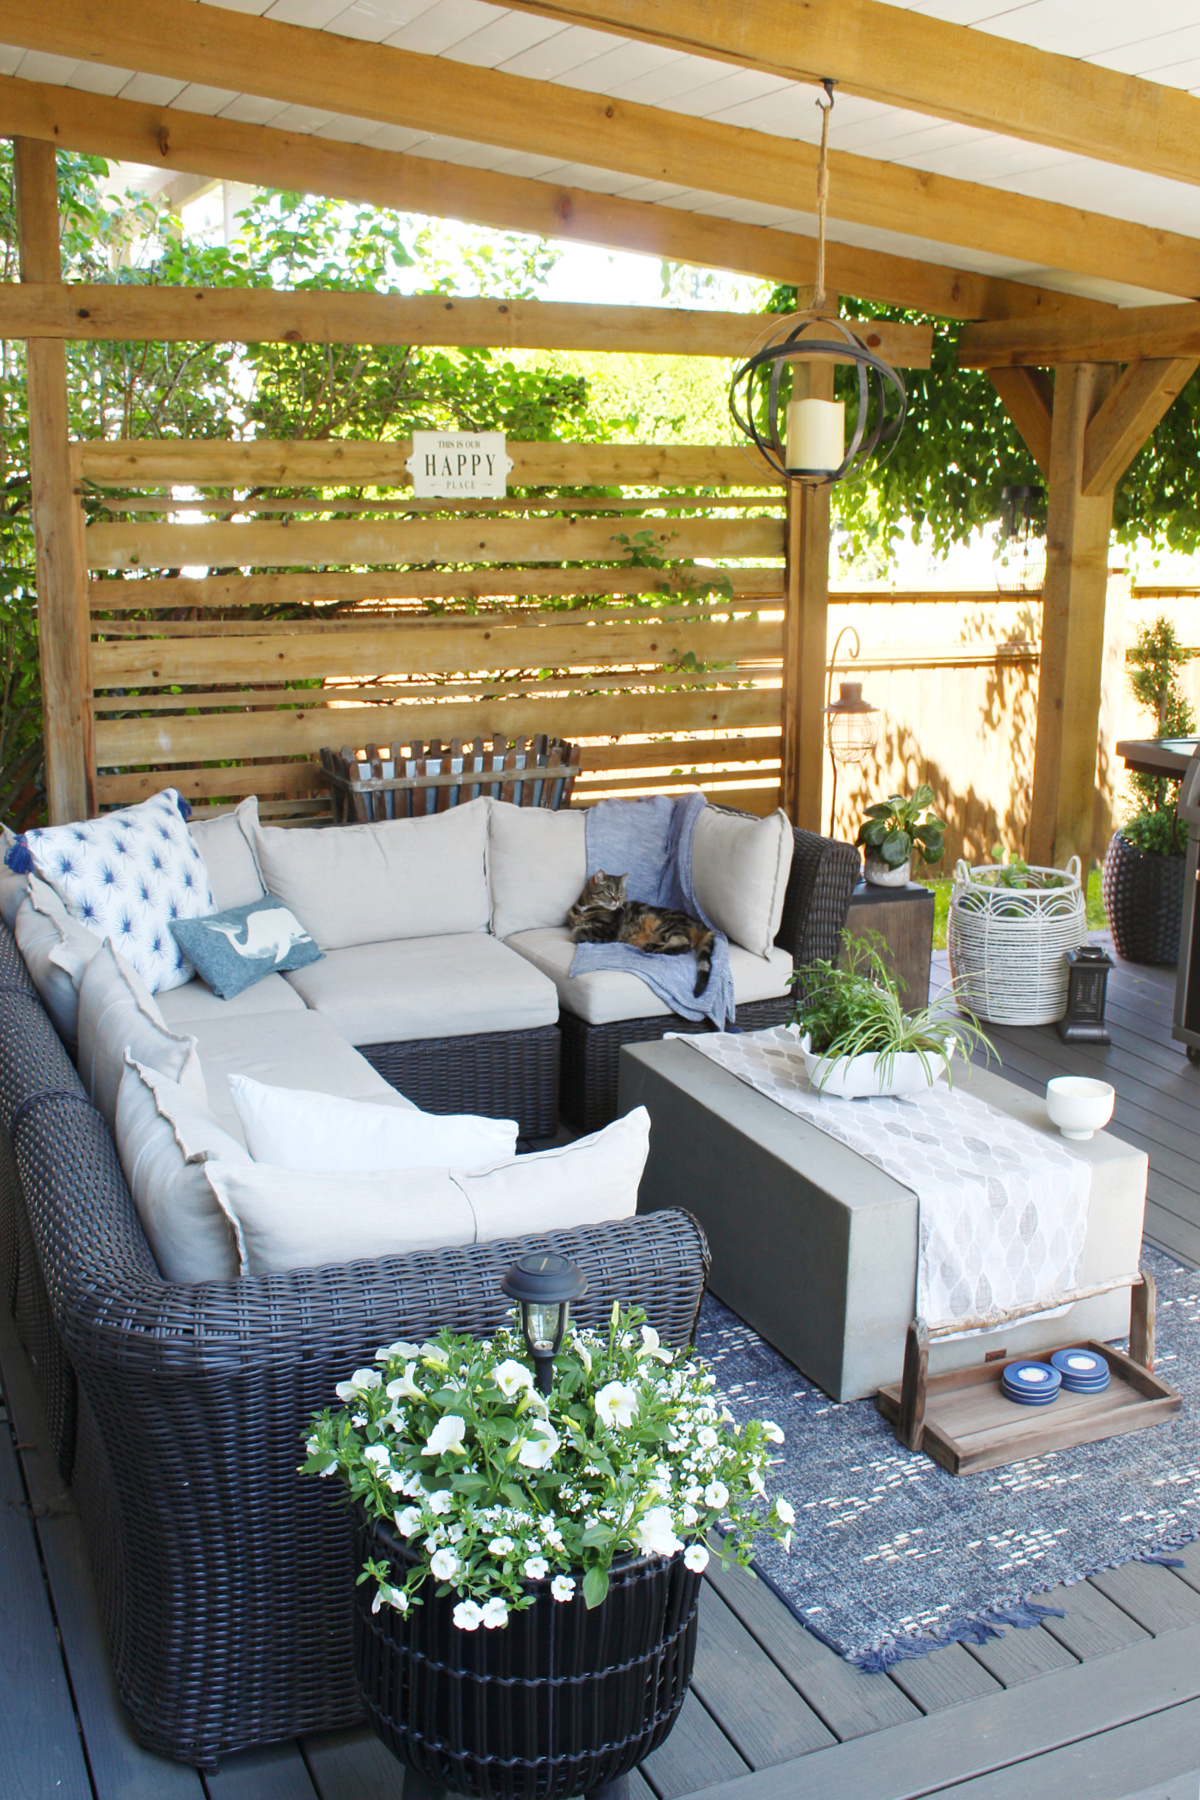 Outdoor sectional in a covered backyard patio.